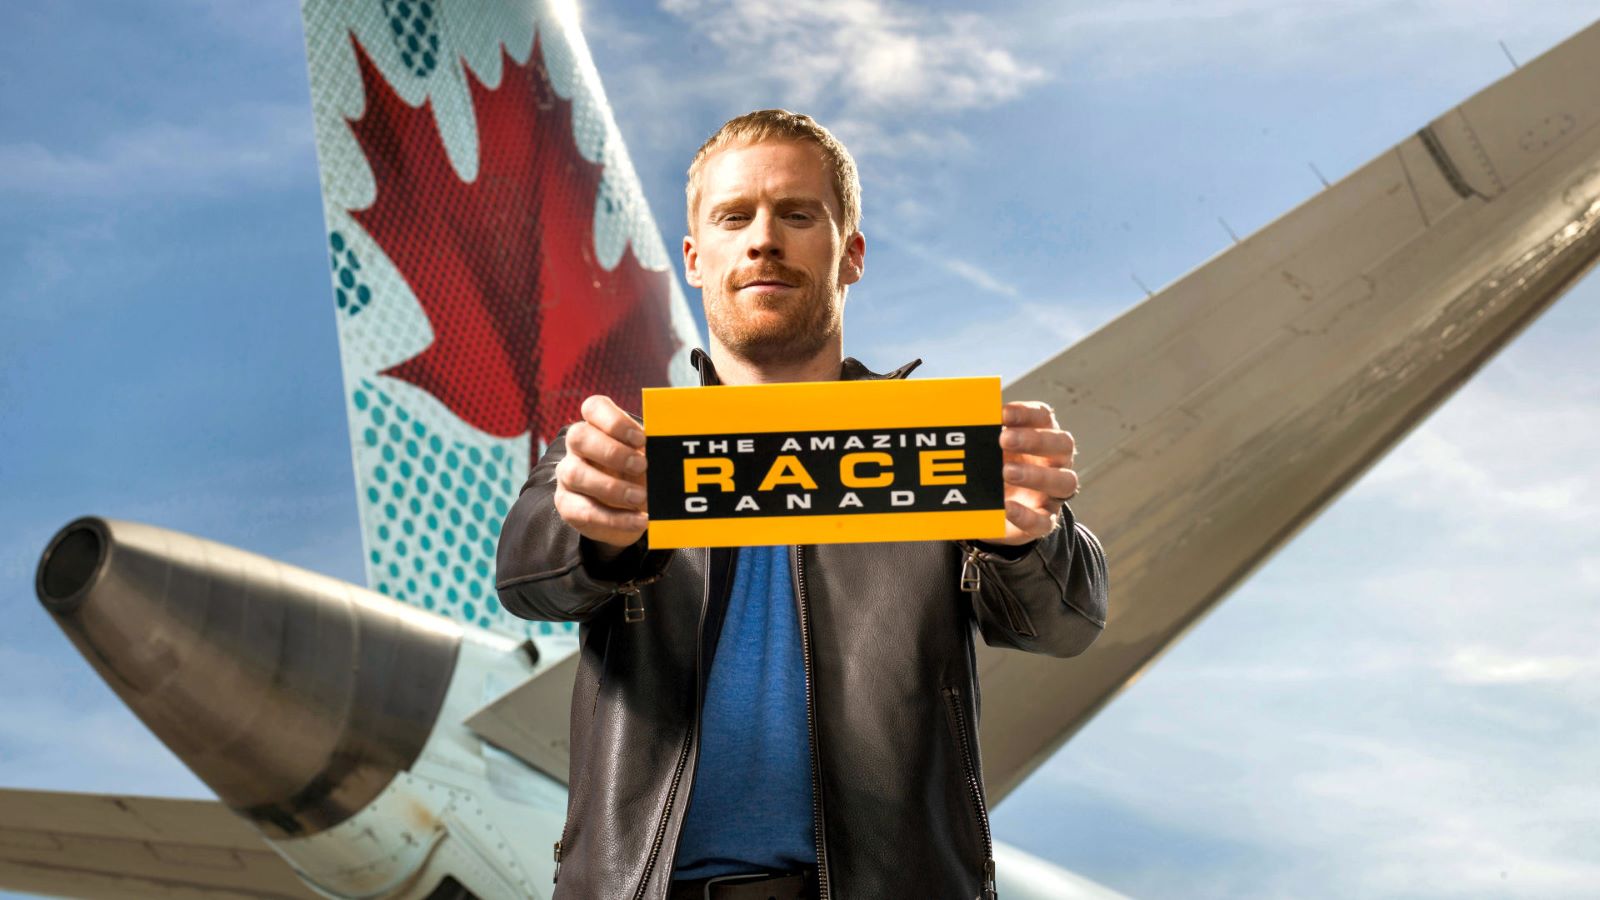 How to Watch The Amazing Race Canada Season 9 Online Stream the Game